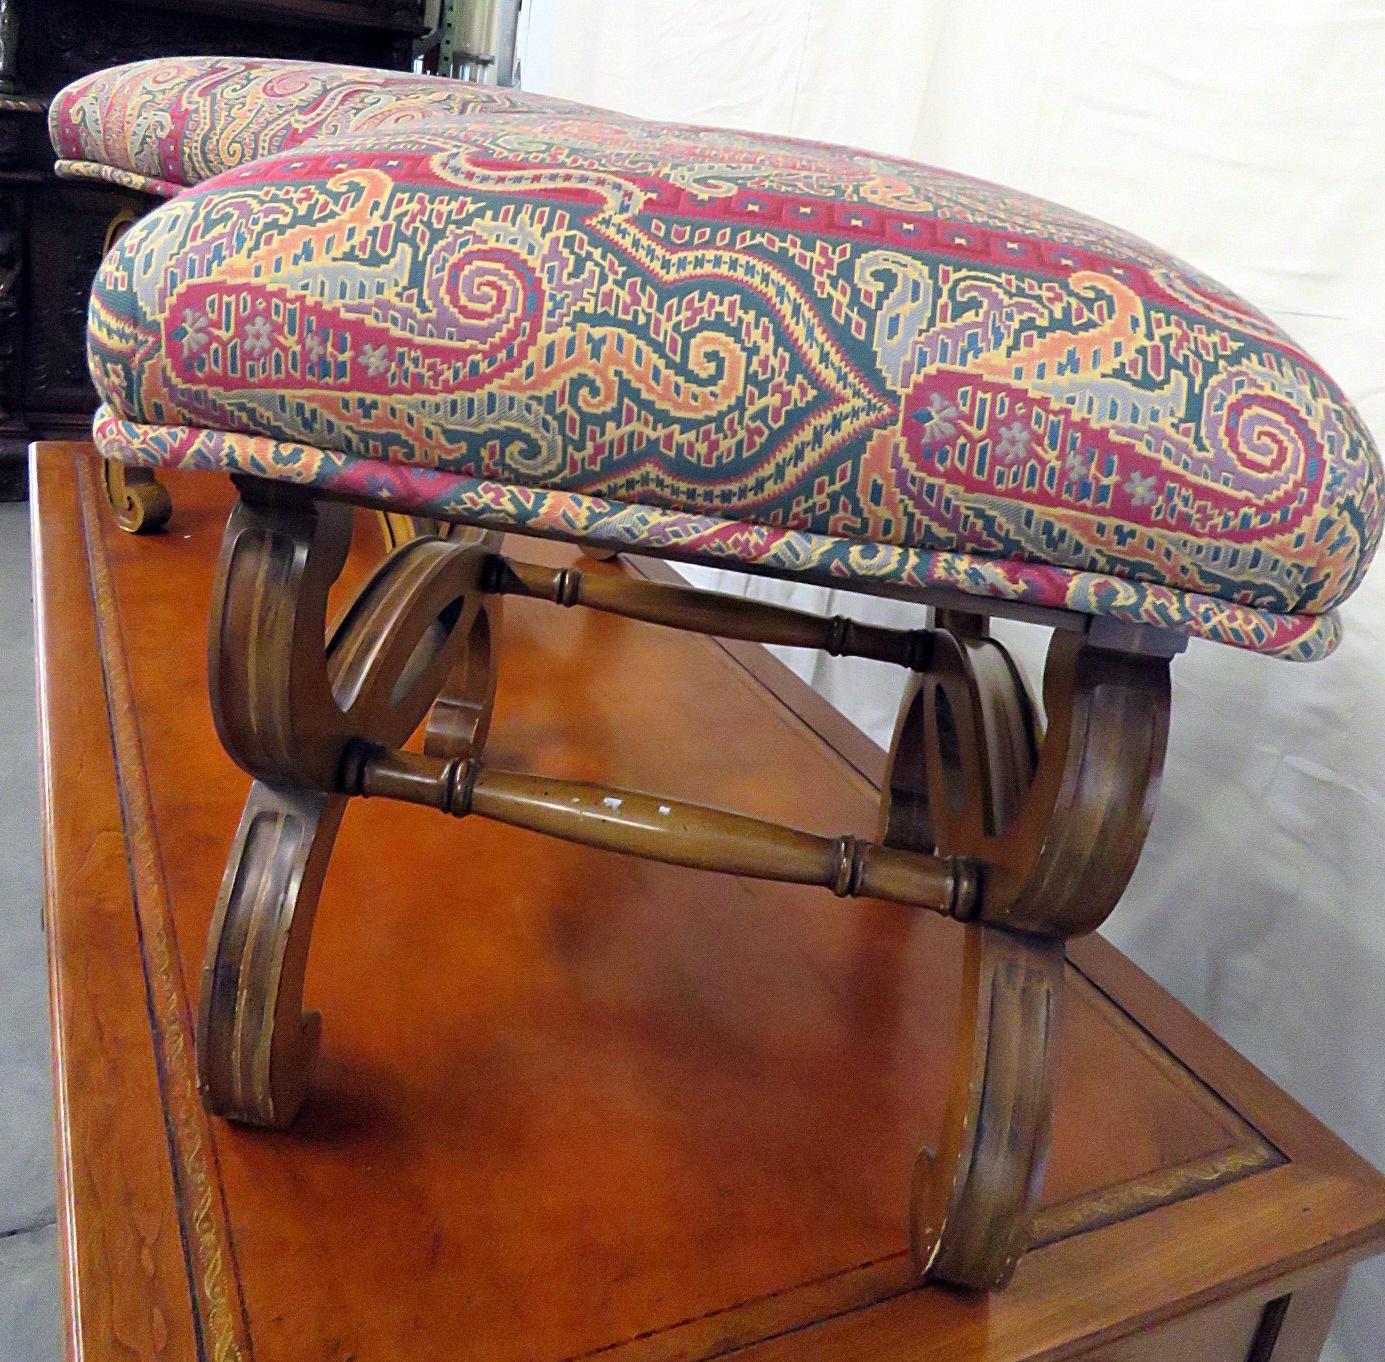 Pair of Regency style footstools with tapestry upholstery.